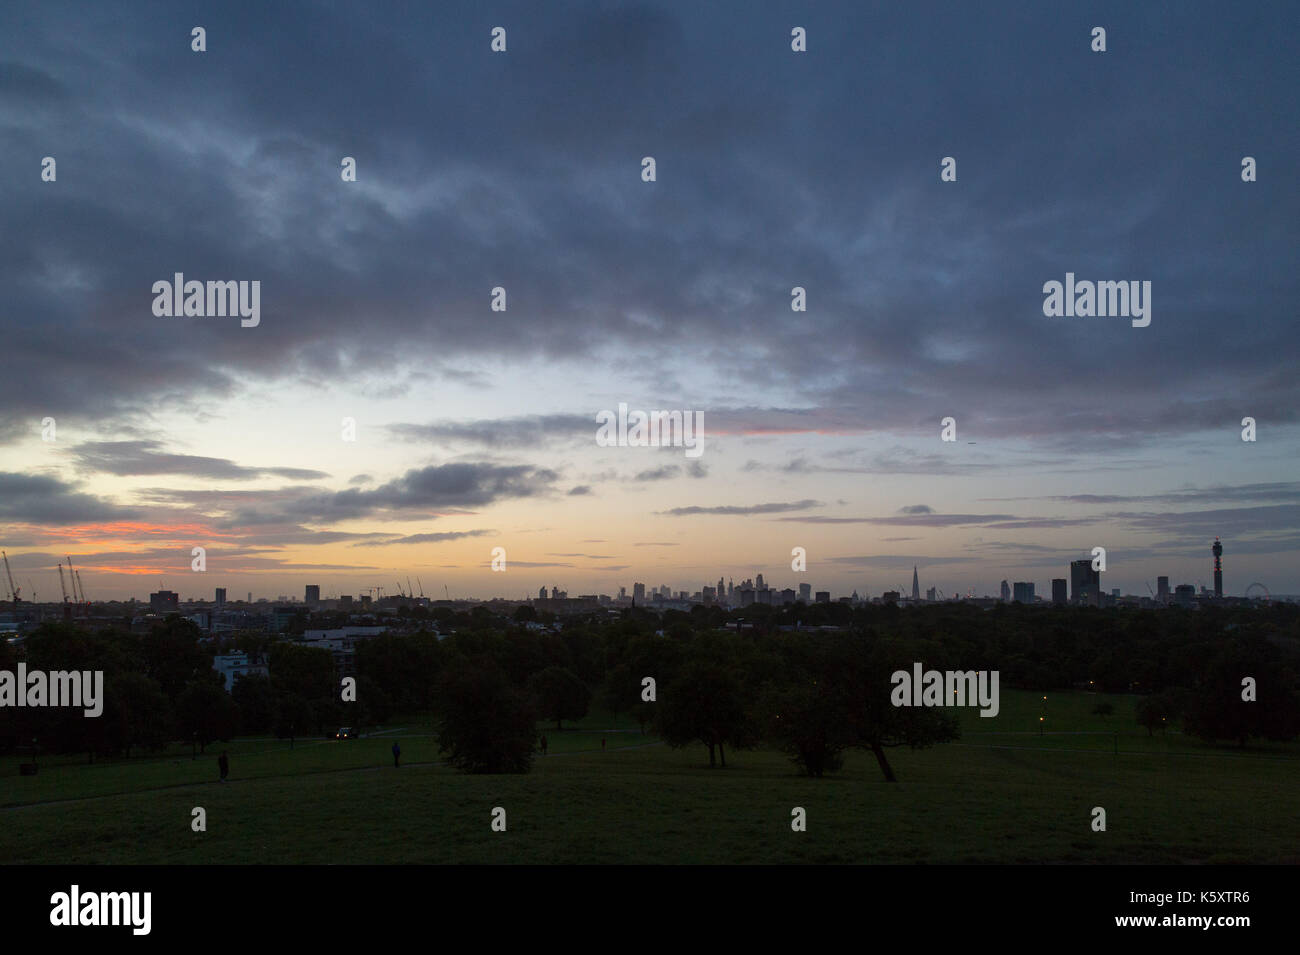 London, UK. 11th Sep, 2017. London, September 11 2017. The rising sun illuminates the clouds above the London skyline as a new day breaks over the city. Credit: Paul Davey/Alamy Live News Stock Photo